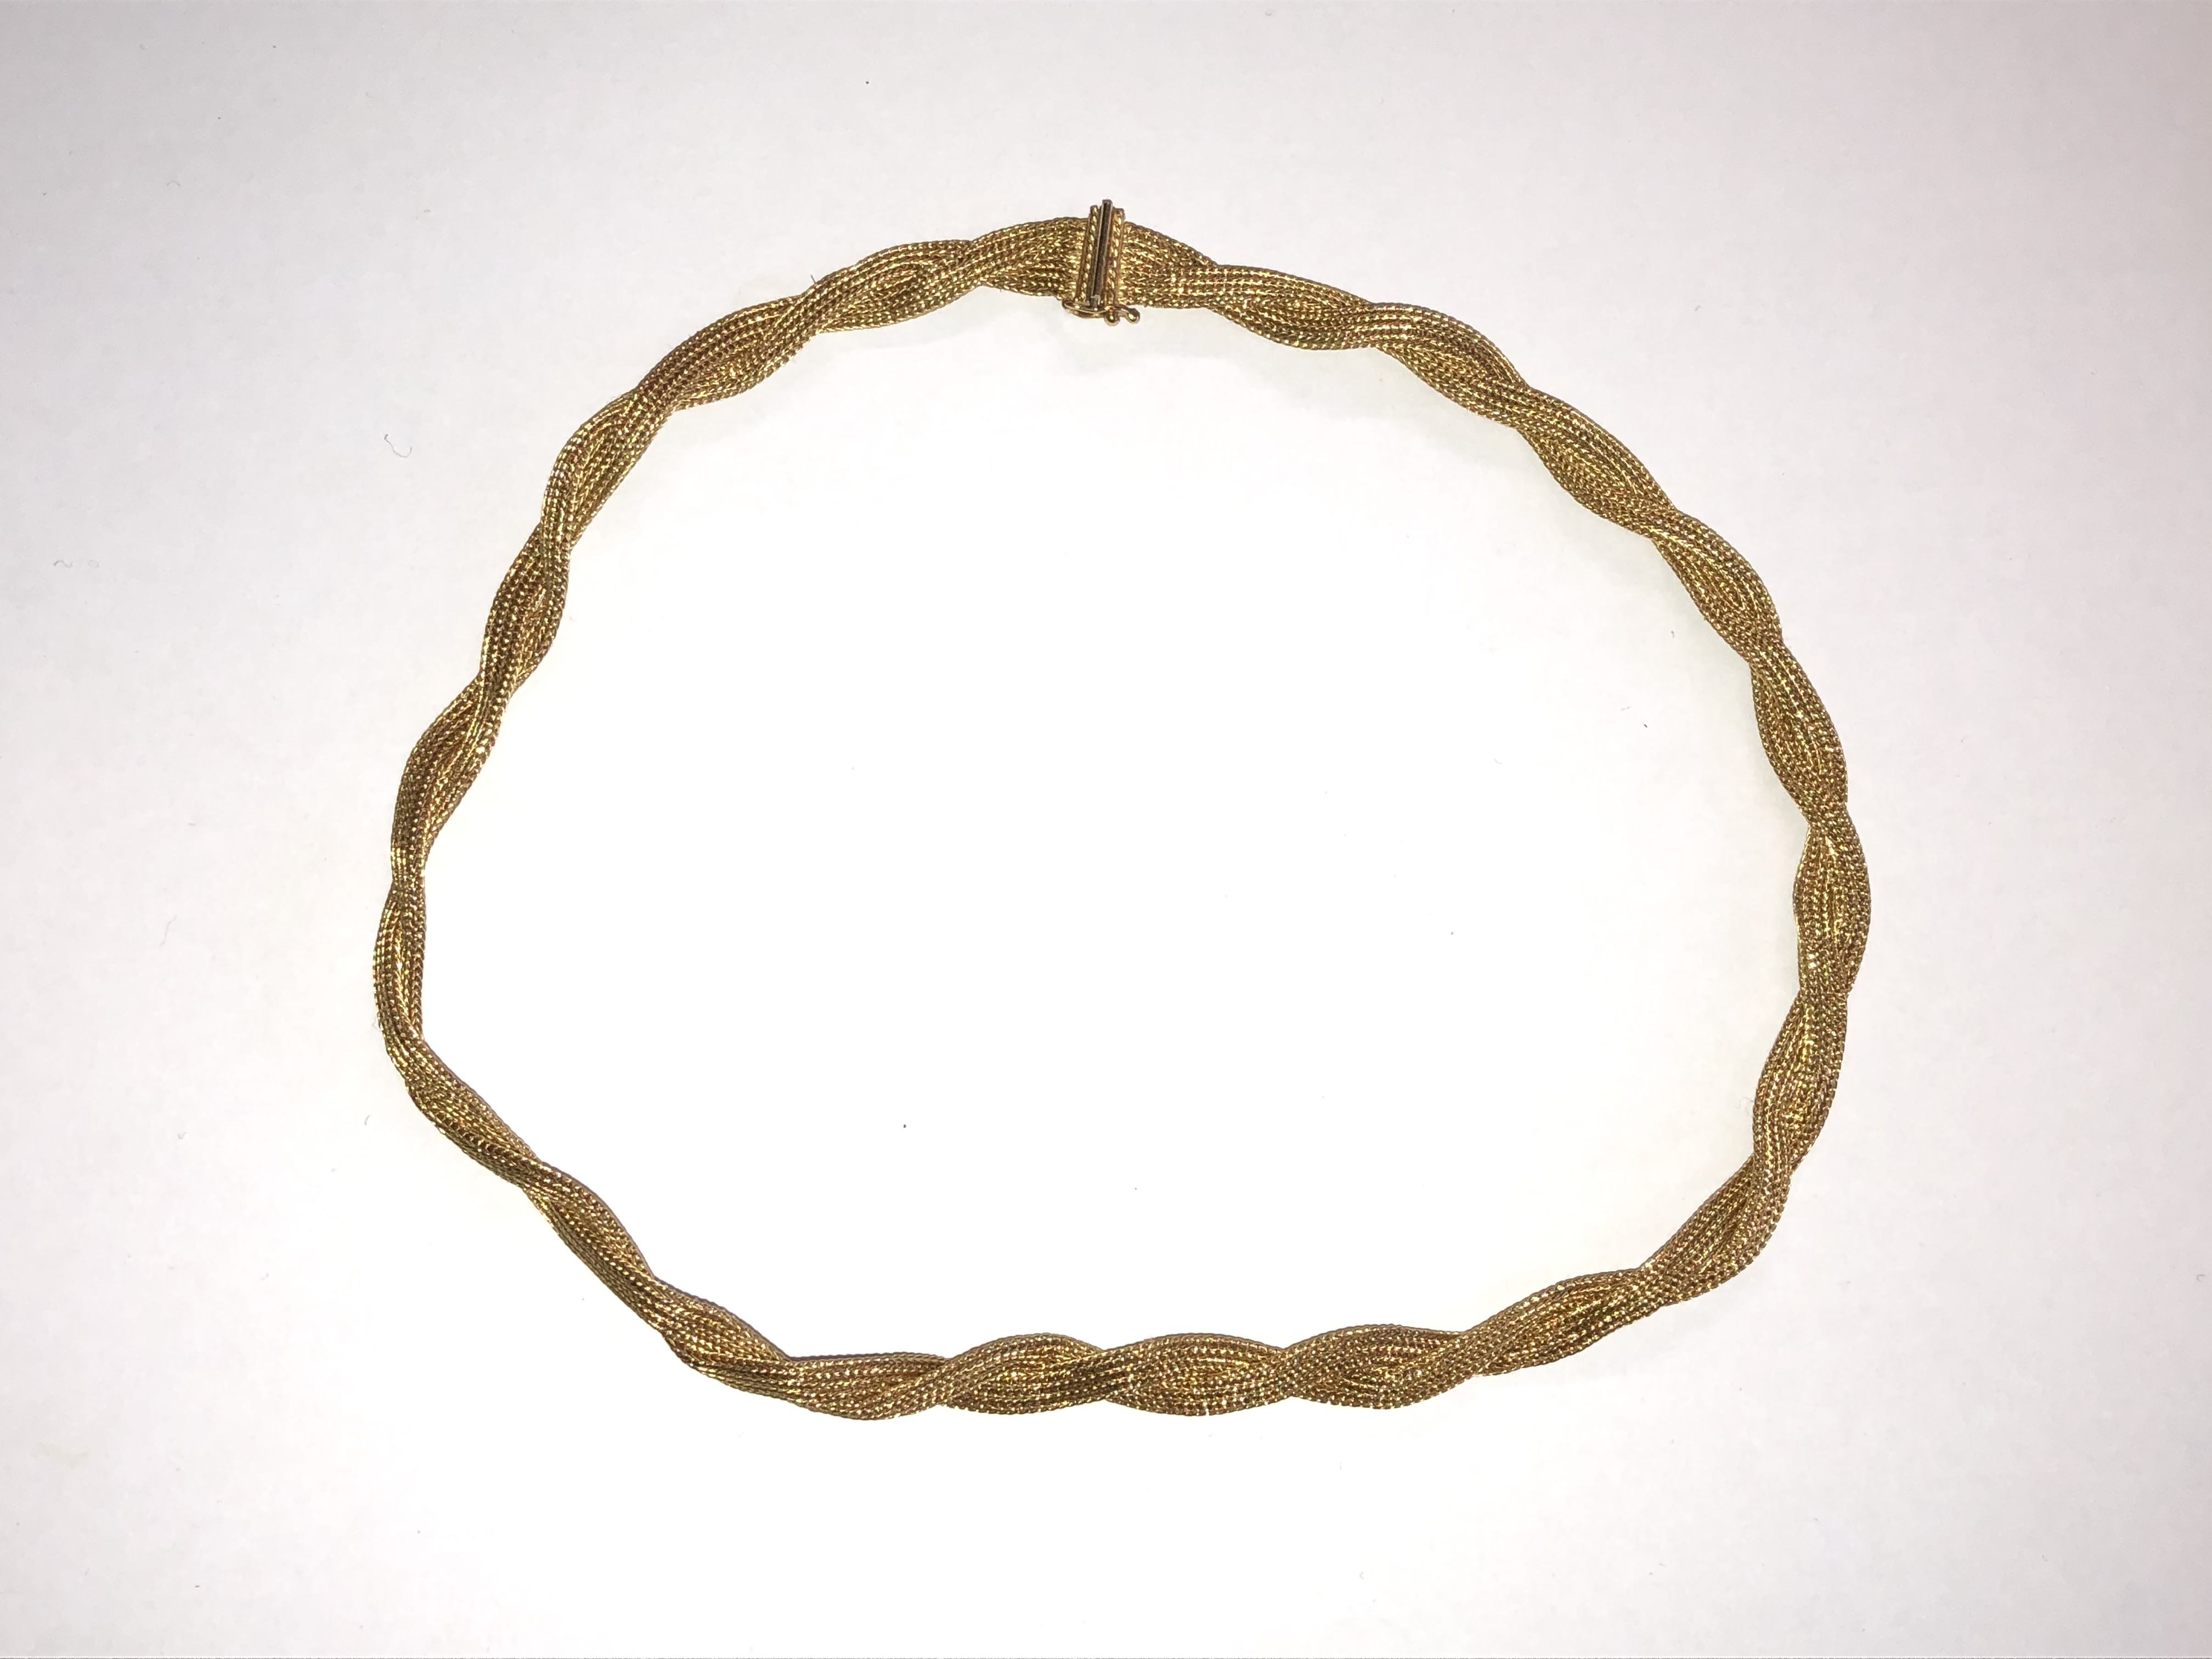 STAMPED 750 DOUBLE MESH ENTWINED NECKLACE 31. - Image 5 of 5